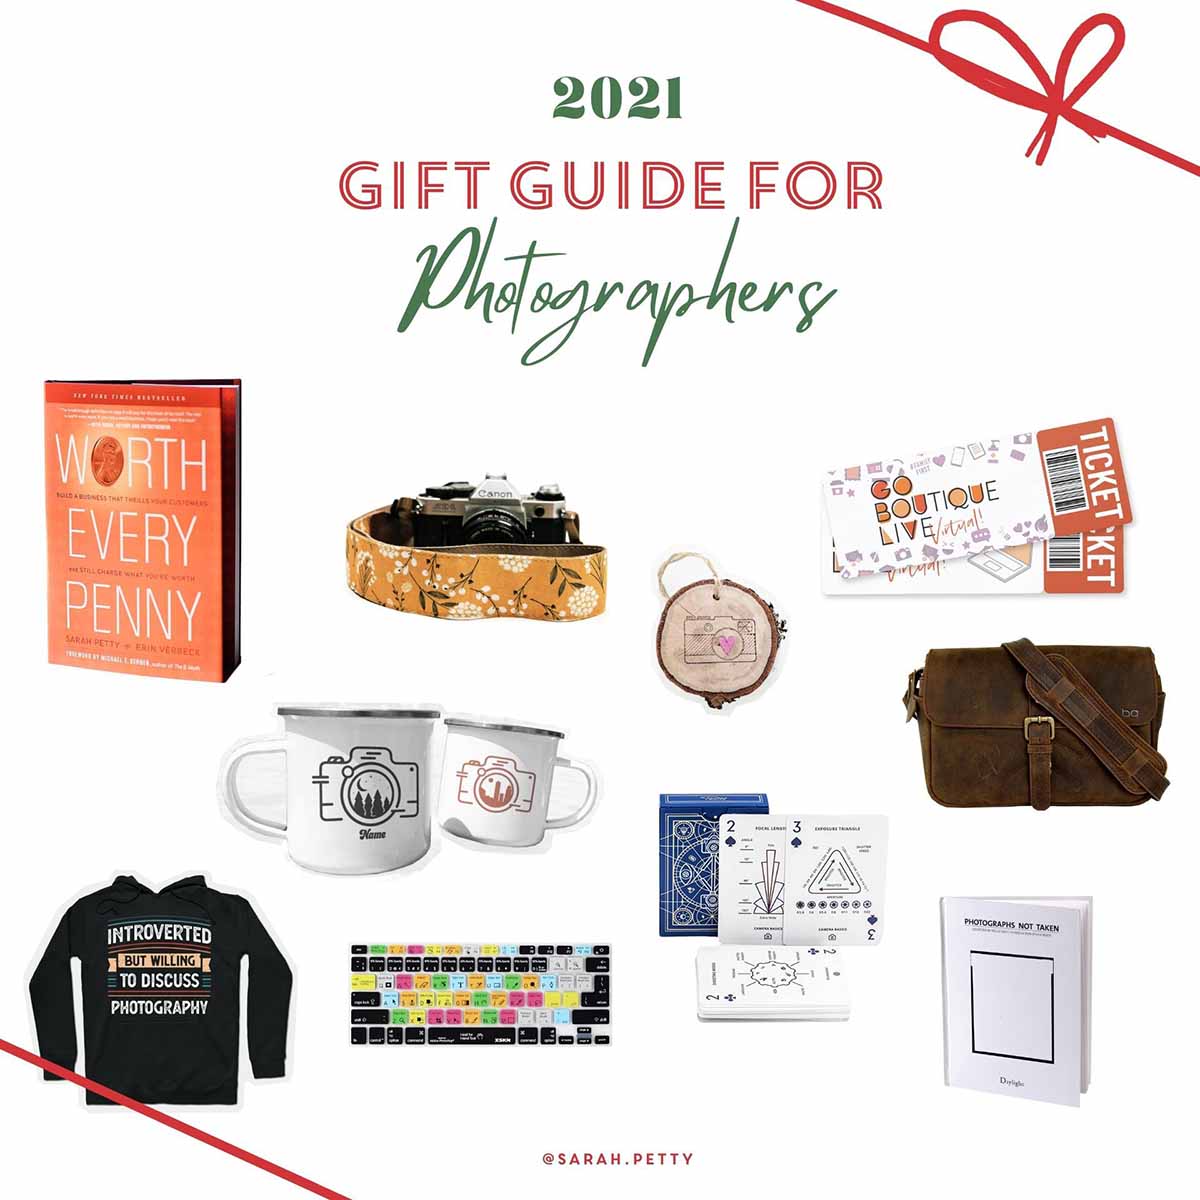 Gift Ideas for Photographers 2021: 10 Wow-worthy gifts any photog will drool over!